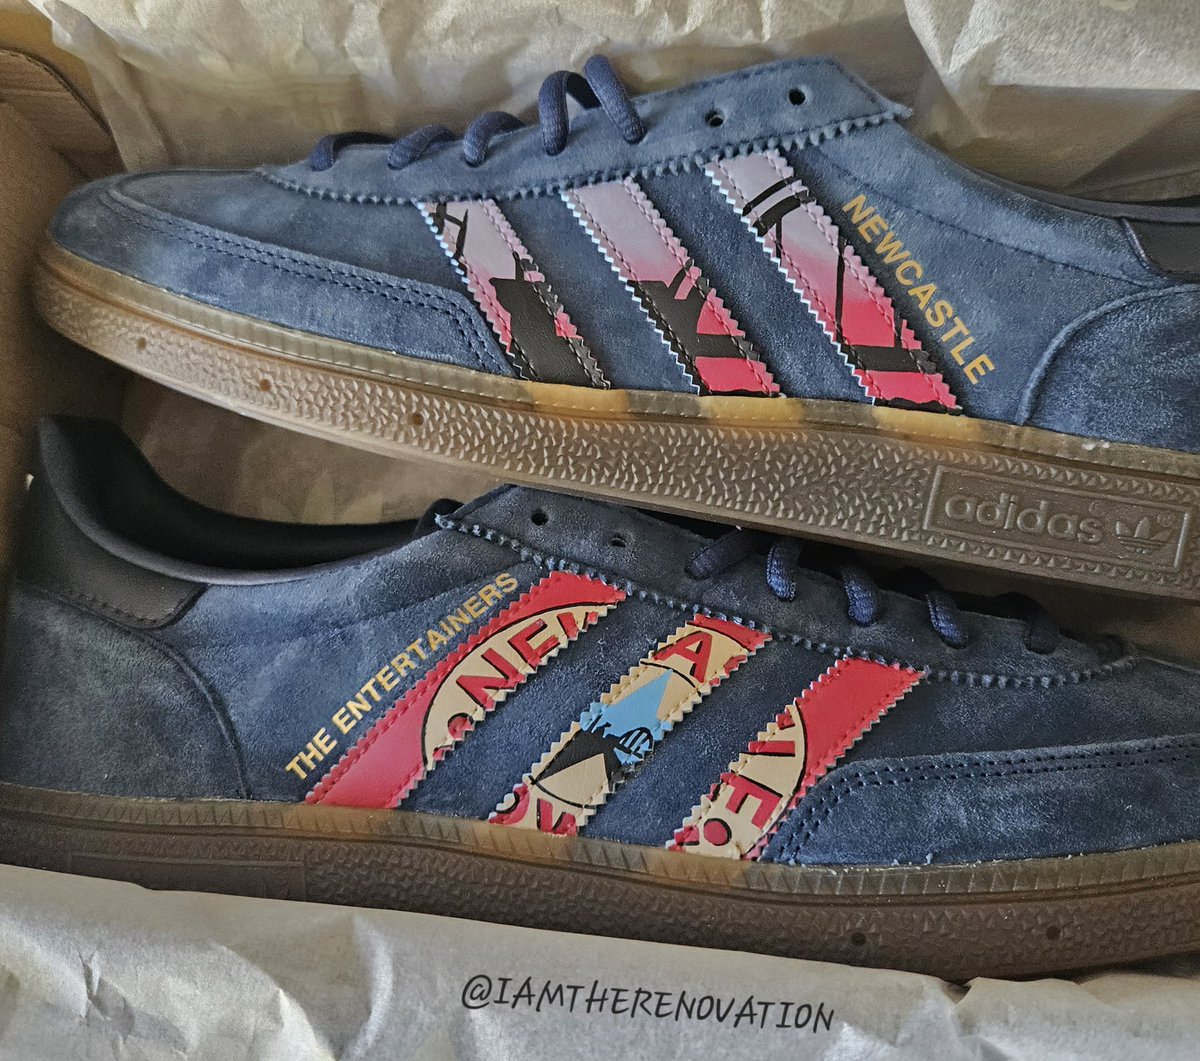 90's away colours inspired custom on the handball Spezial It's a fine time to be on the Tyne ⚽ Direct message for all custom enquiries and requests #iamtherenovation #custommade #newcastle #Tyne #howaythelads